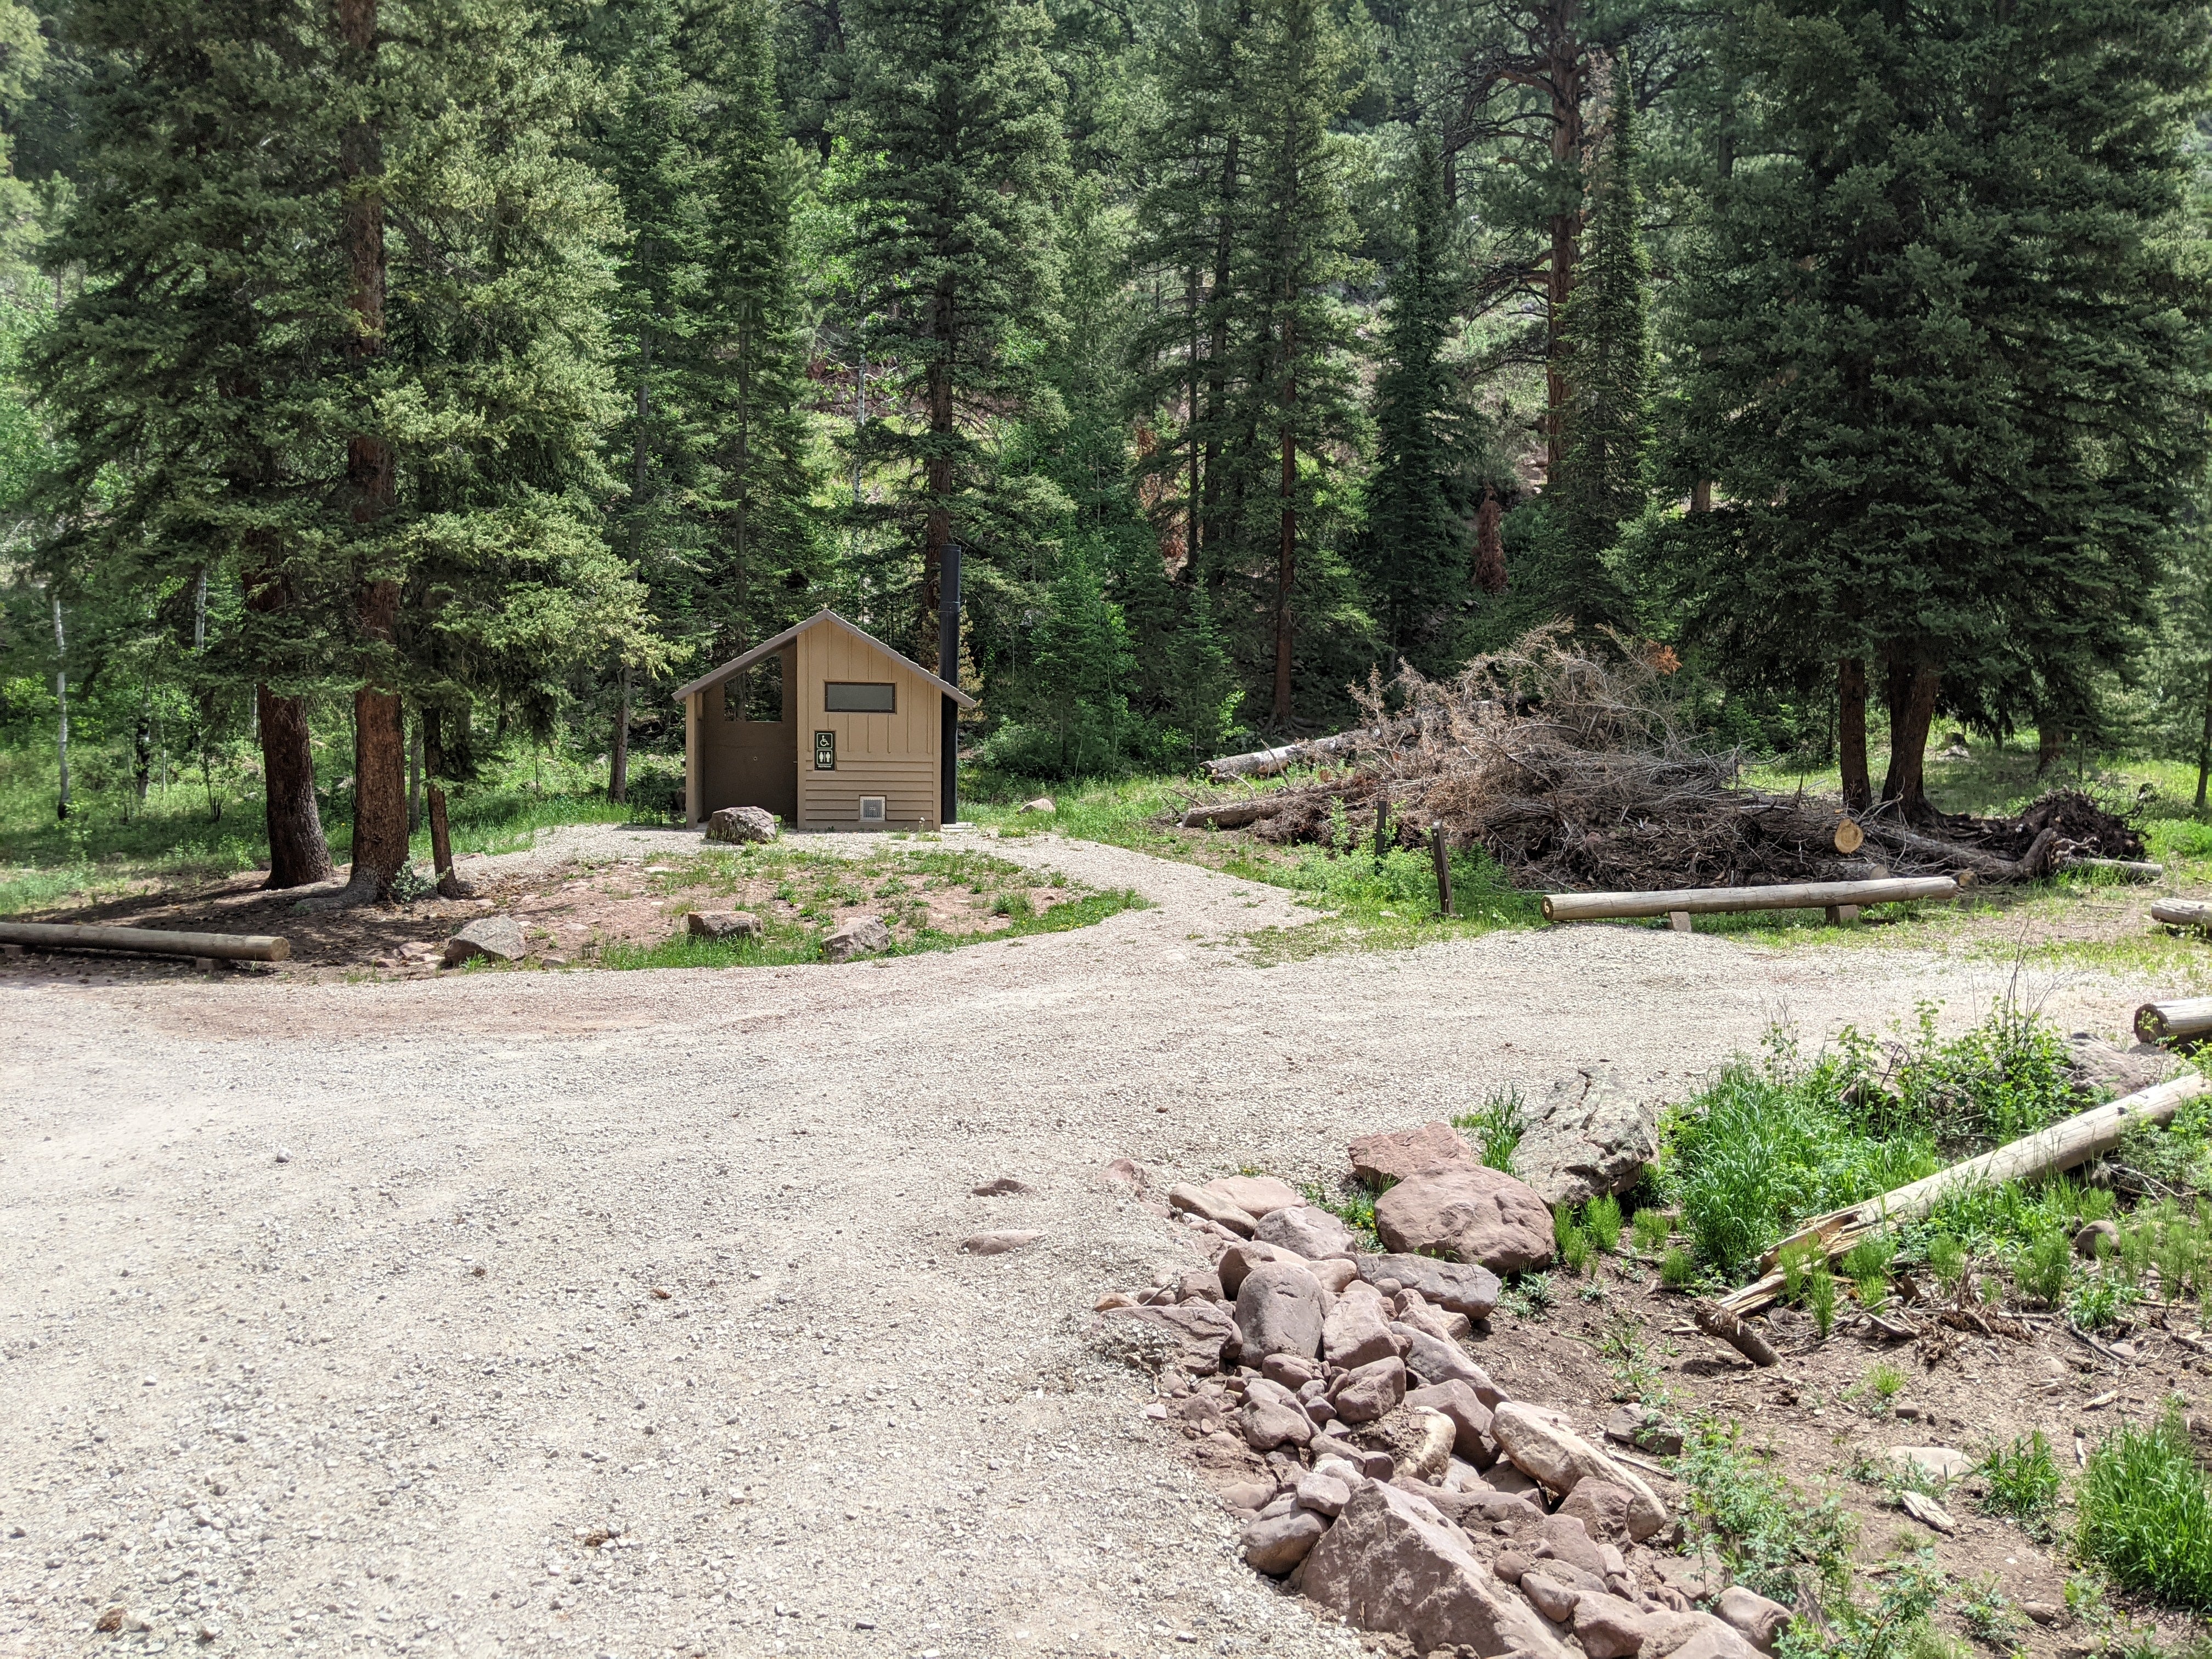 Camper submitted image from Ashley National Forest - Deep Creek Campground - 3